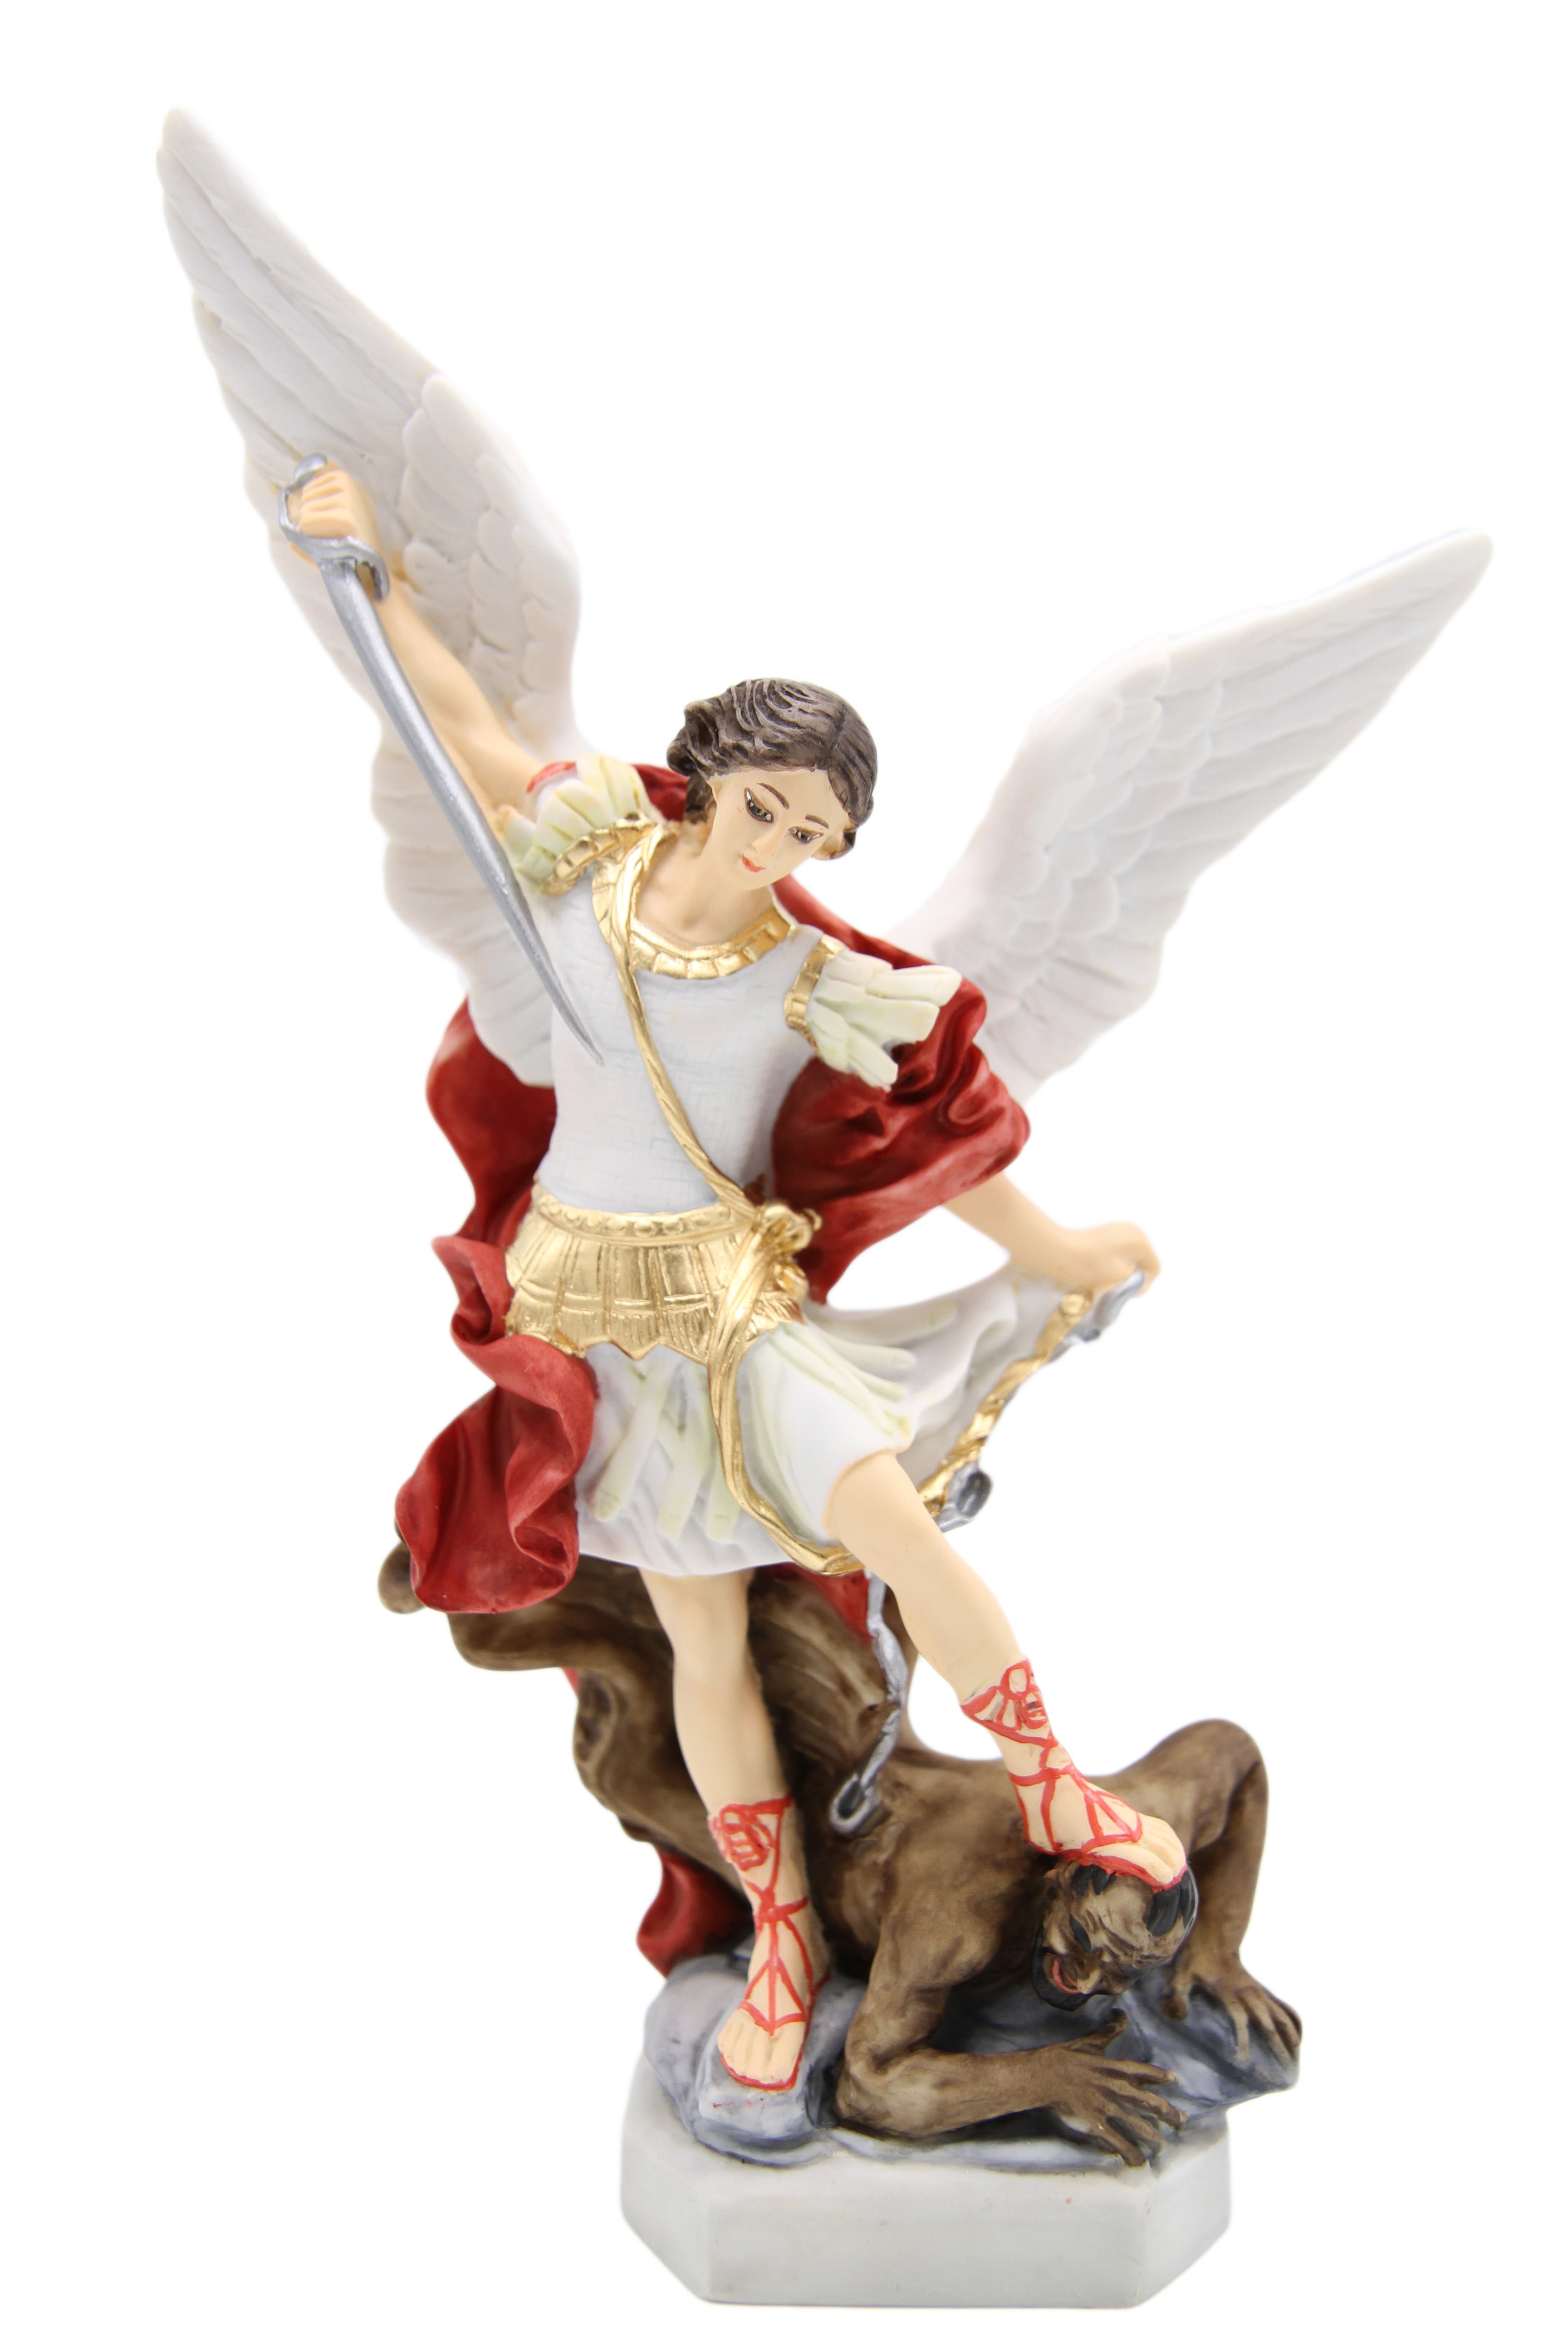 11 Inch Saint St. Michael Archangel Catholic Statue Made in Italy